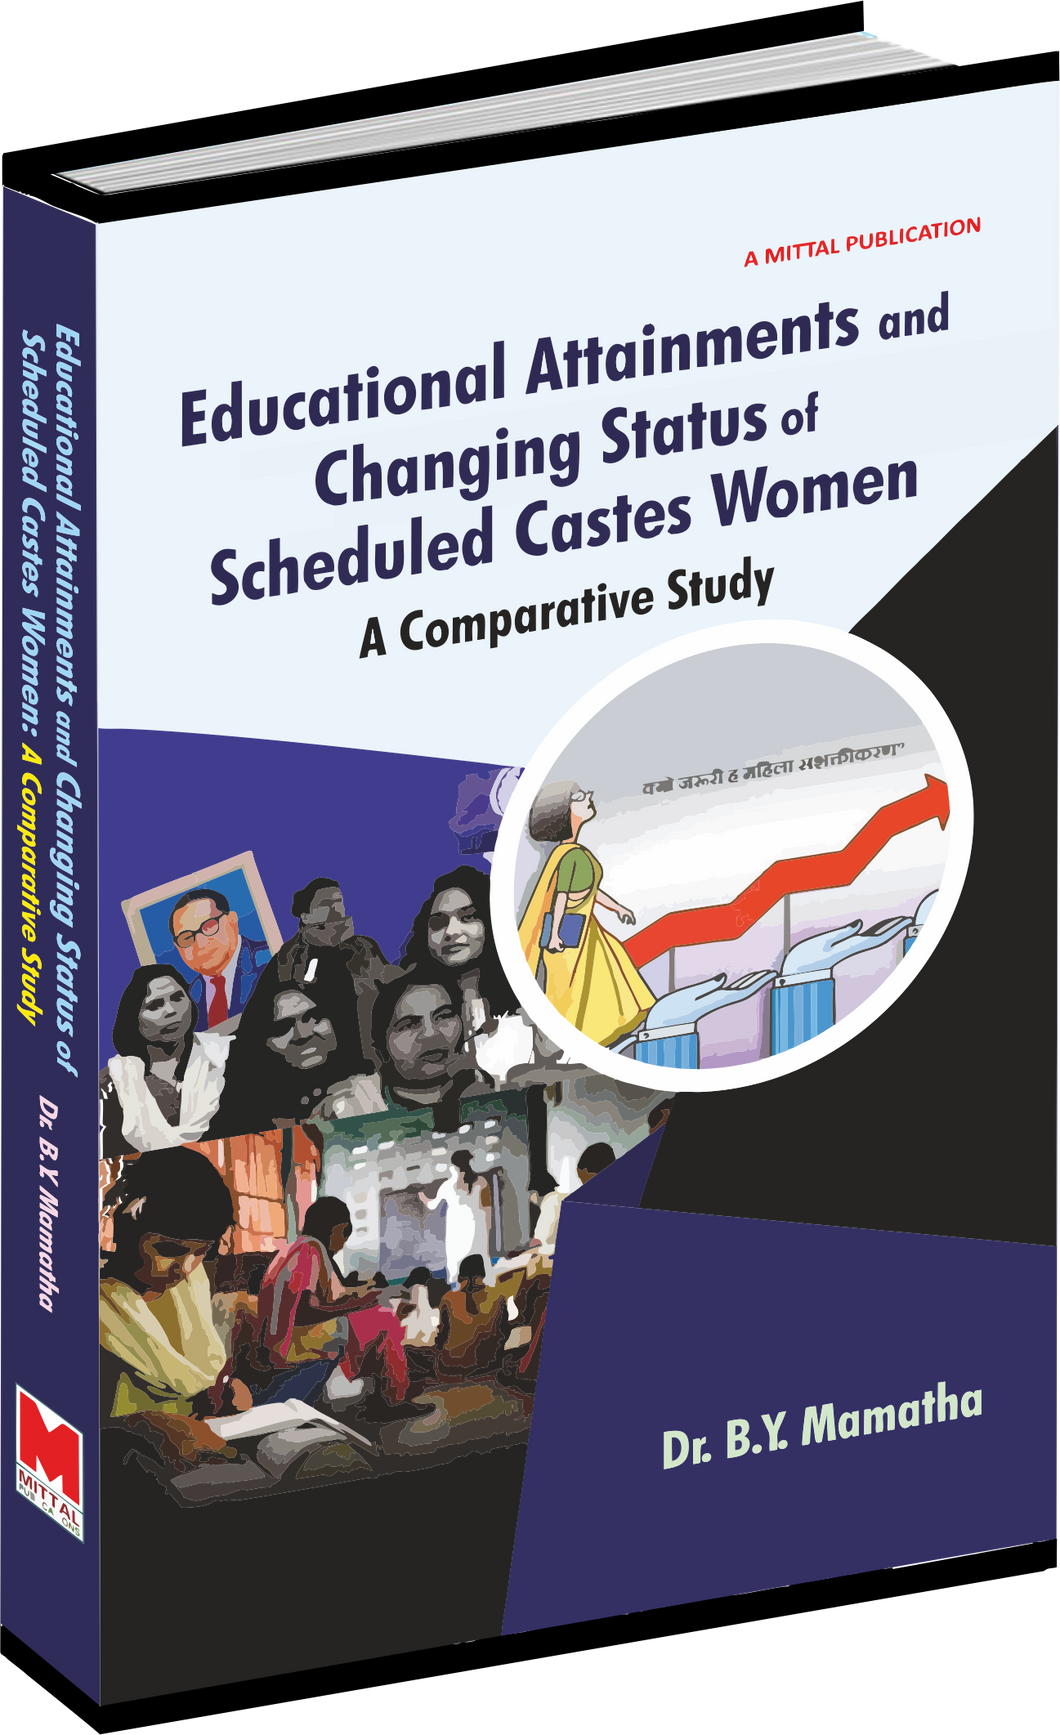 Educational Attainments and Changing Status of Scheduled Caste Women: A Comparative Study by Dr. B.Y. Mamatha